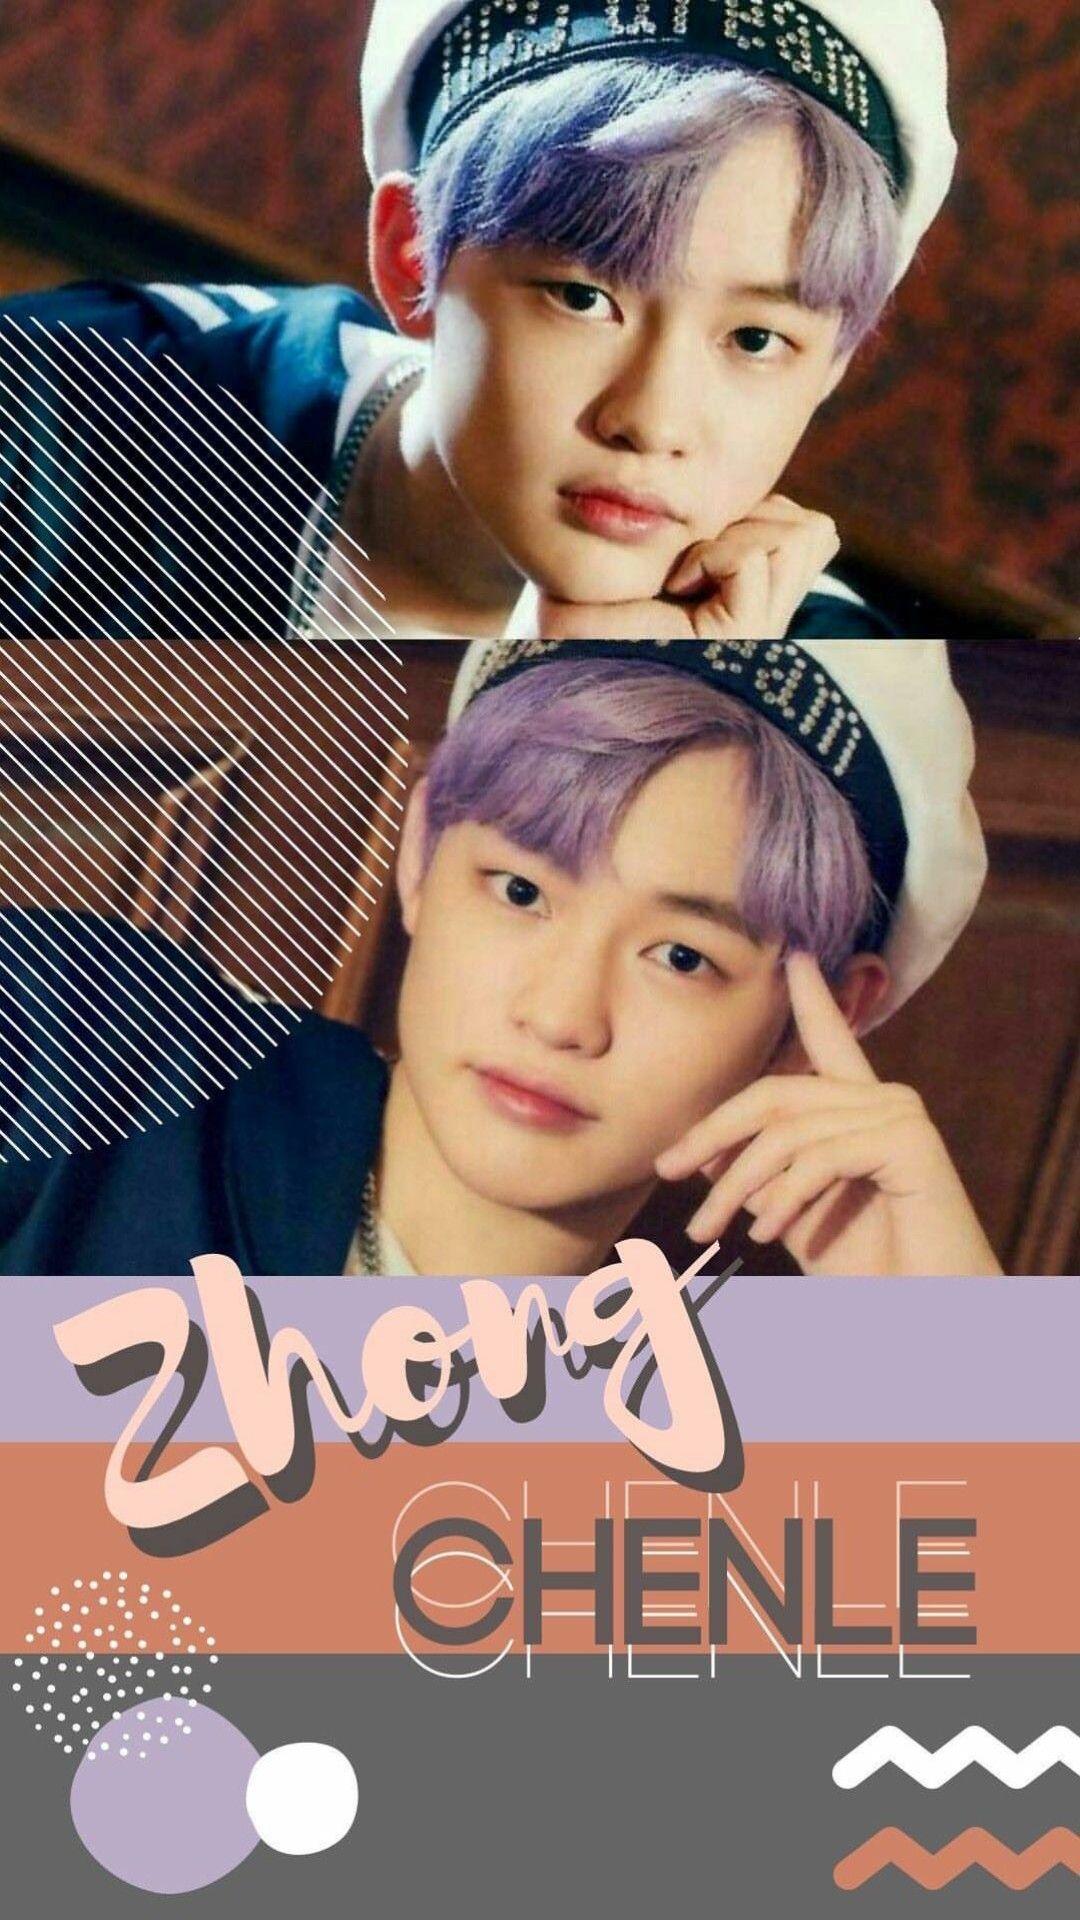 nct. Nct chenle, Nct dream